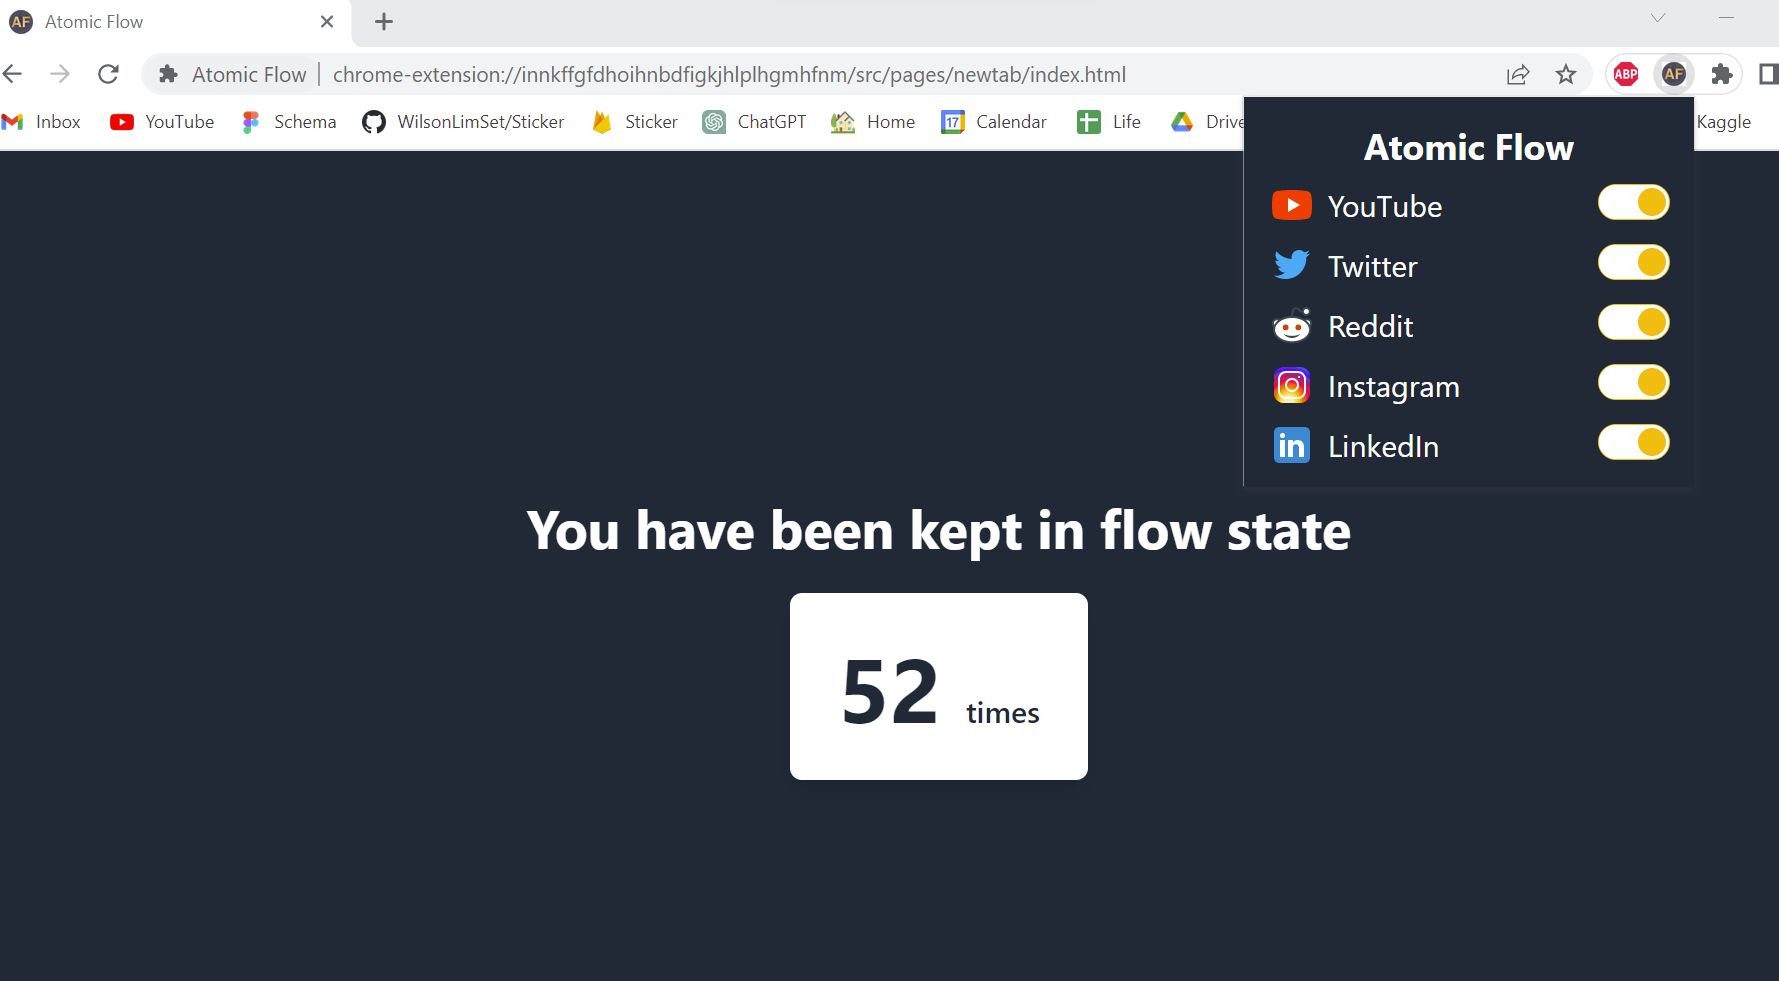 Atomic Flow - Avoid distractions and stay in flow | Product Hunt